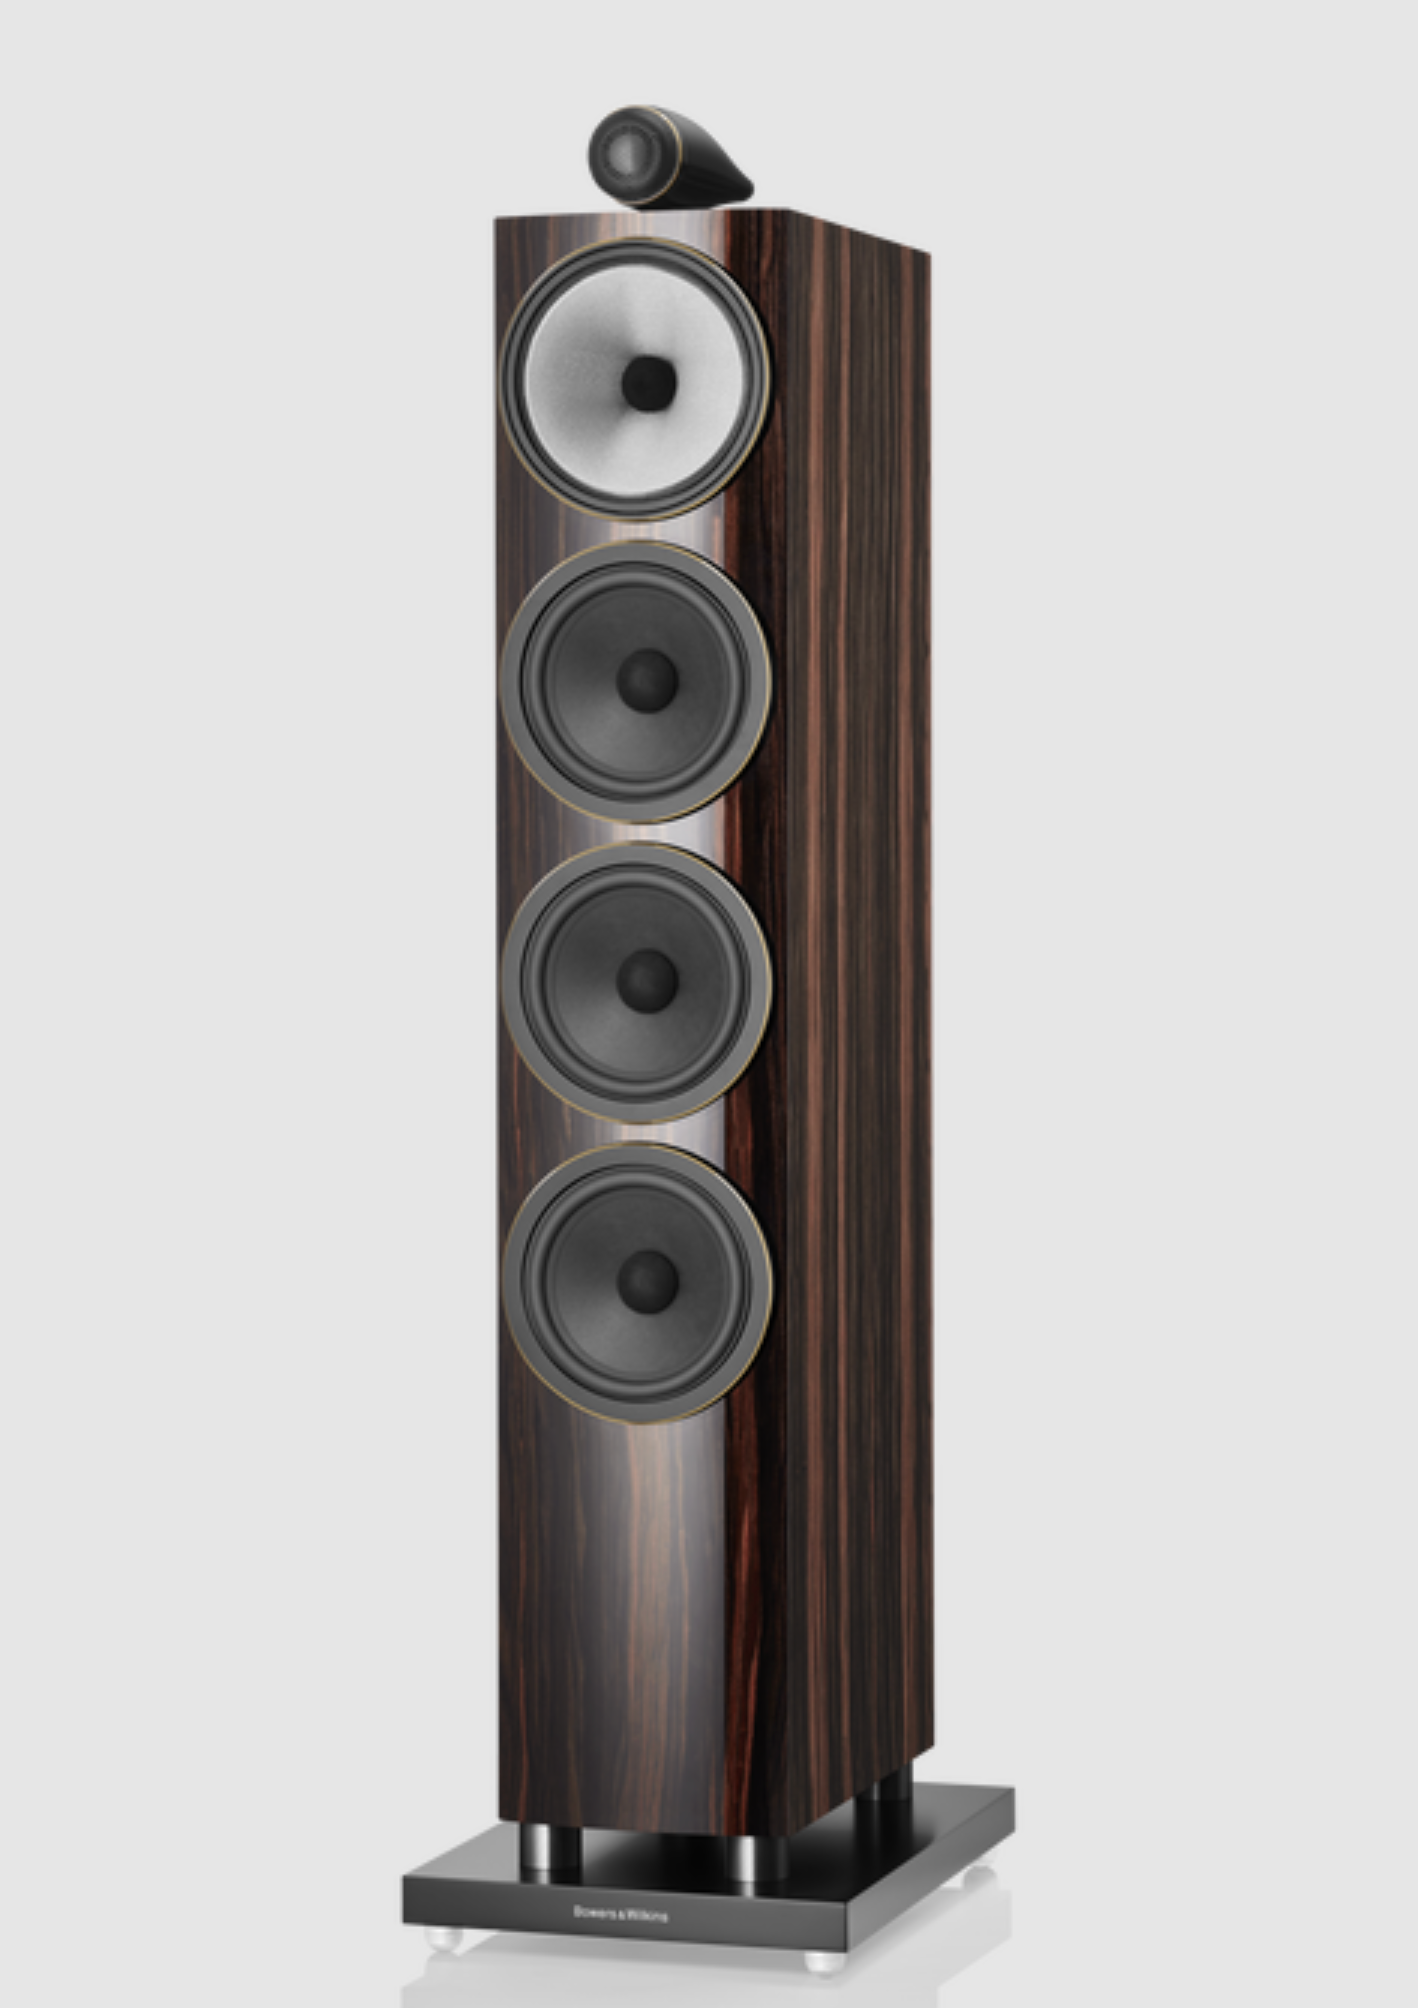 Bowers & Wilkins 702 S3 Signature Floorstanders in Datuk Gloss. Image shows front and side of speaker